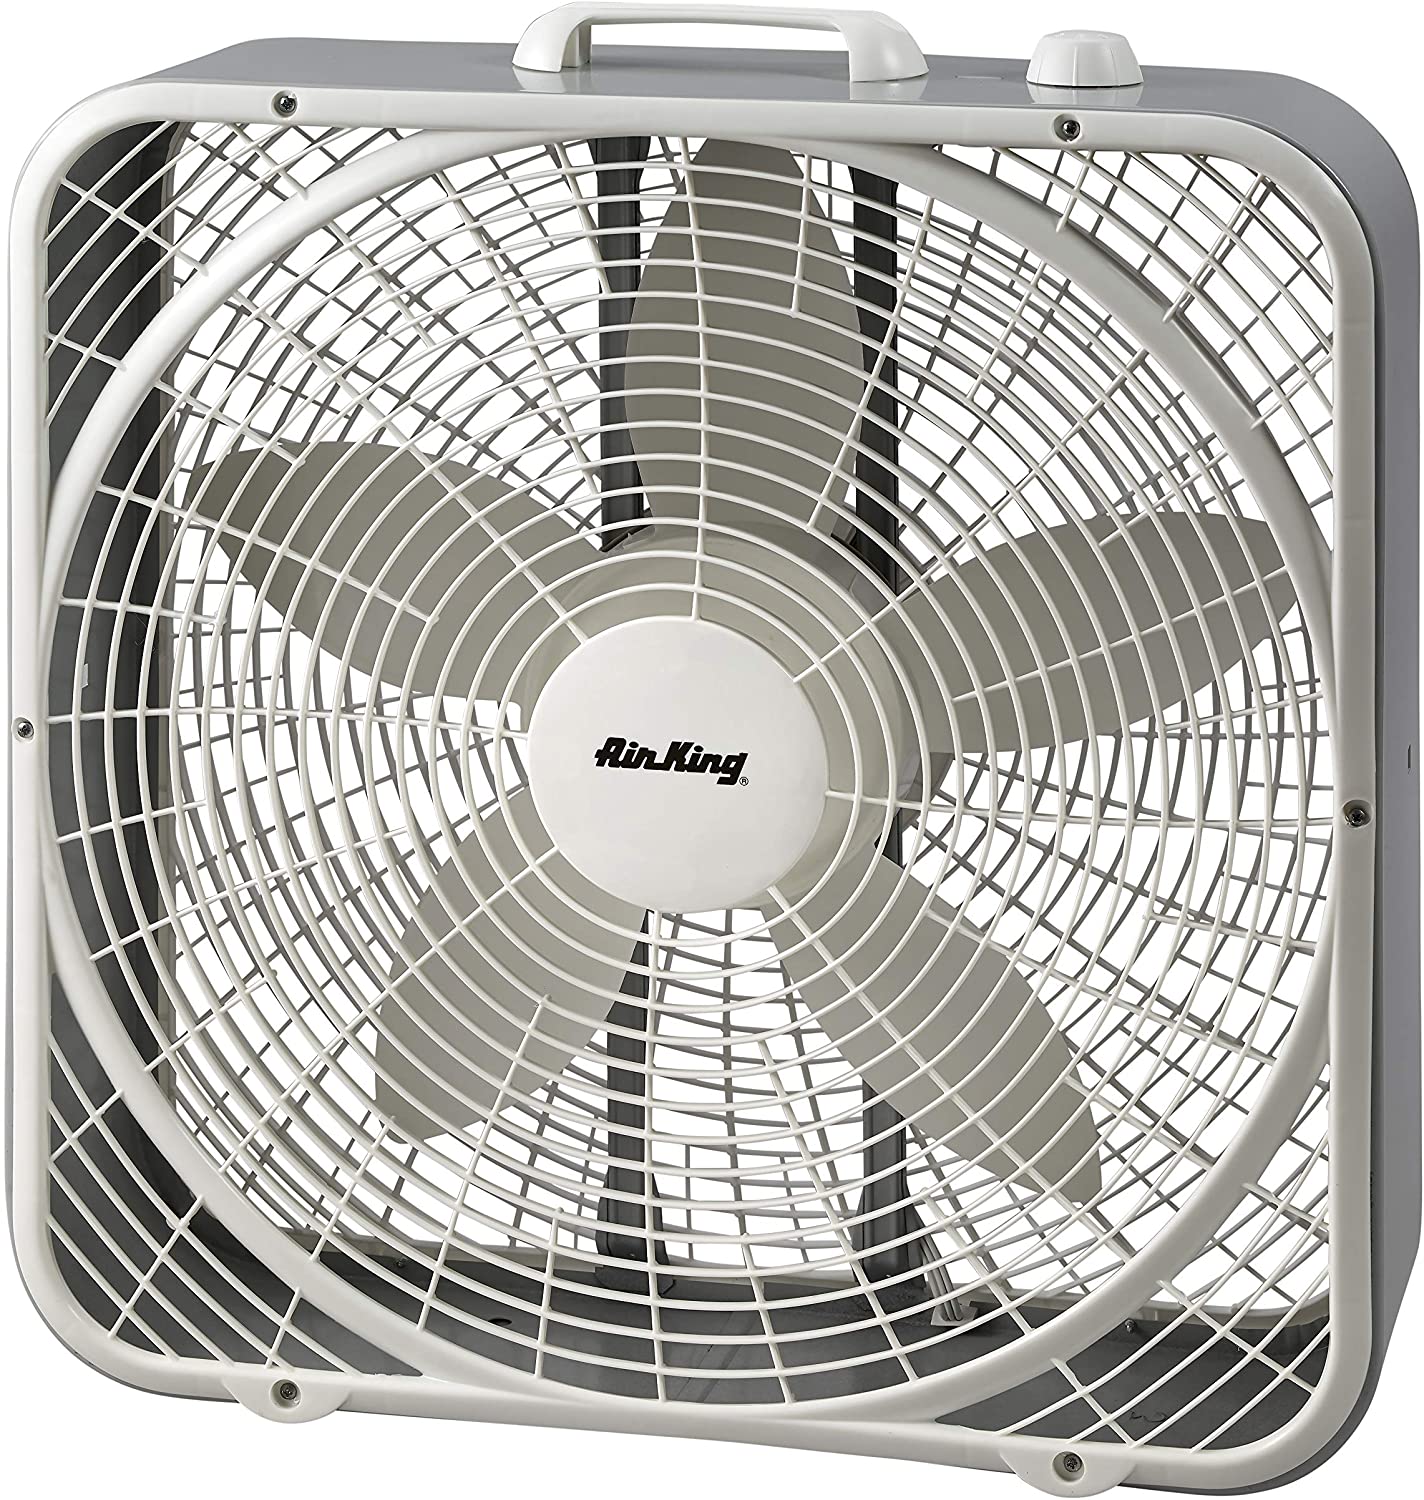 Air King 9723 Impact-Resistant Commercial Grade Box Fan, 20-Inch